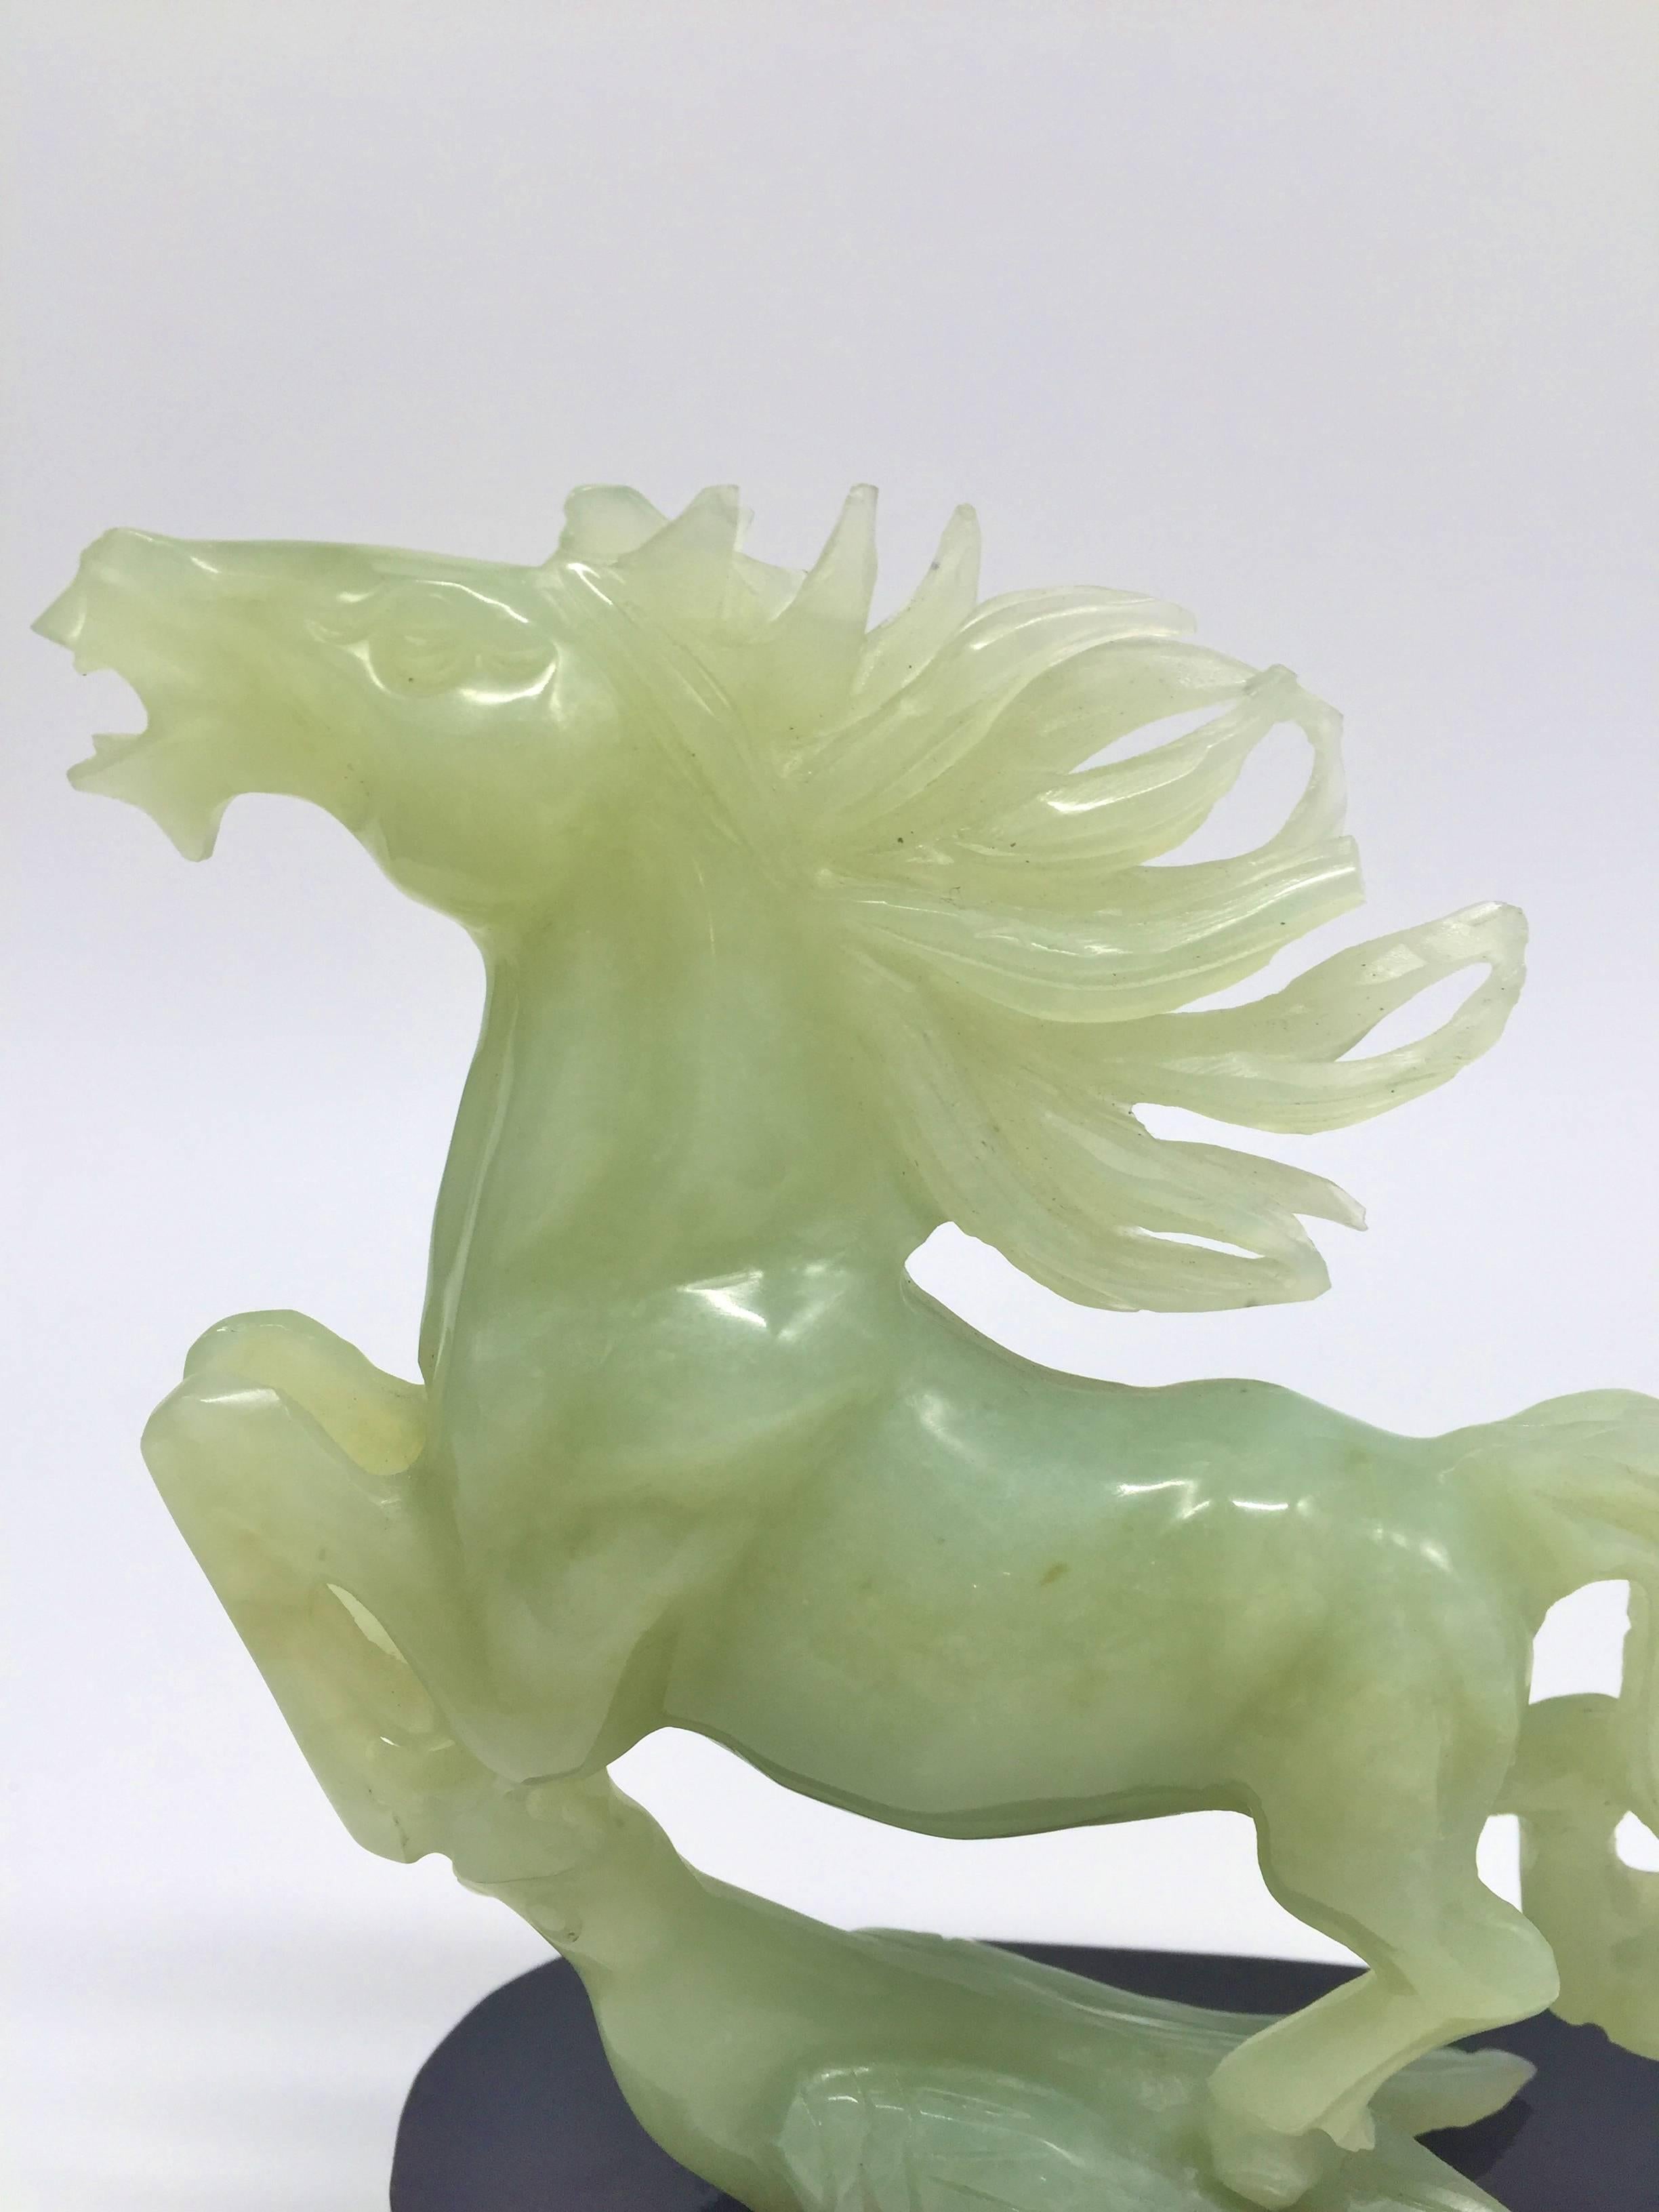 A beautiful sculpture of jade horse with one of his hoofs on a swallow, a symbol of superior speed and success. A boulder of fine celadon jade became an art piece through the hands of a master carver. This majestic horse is caught in motion of